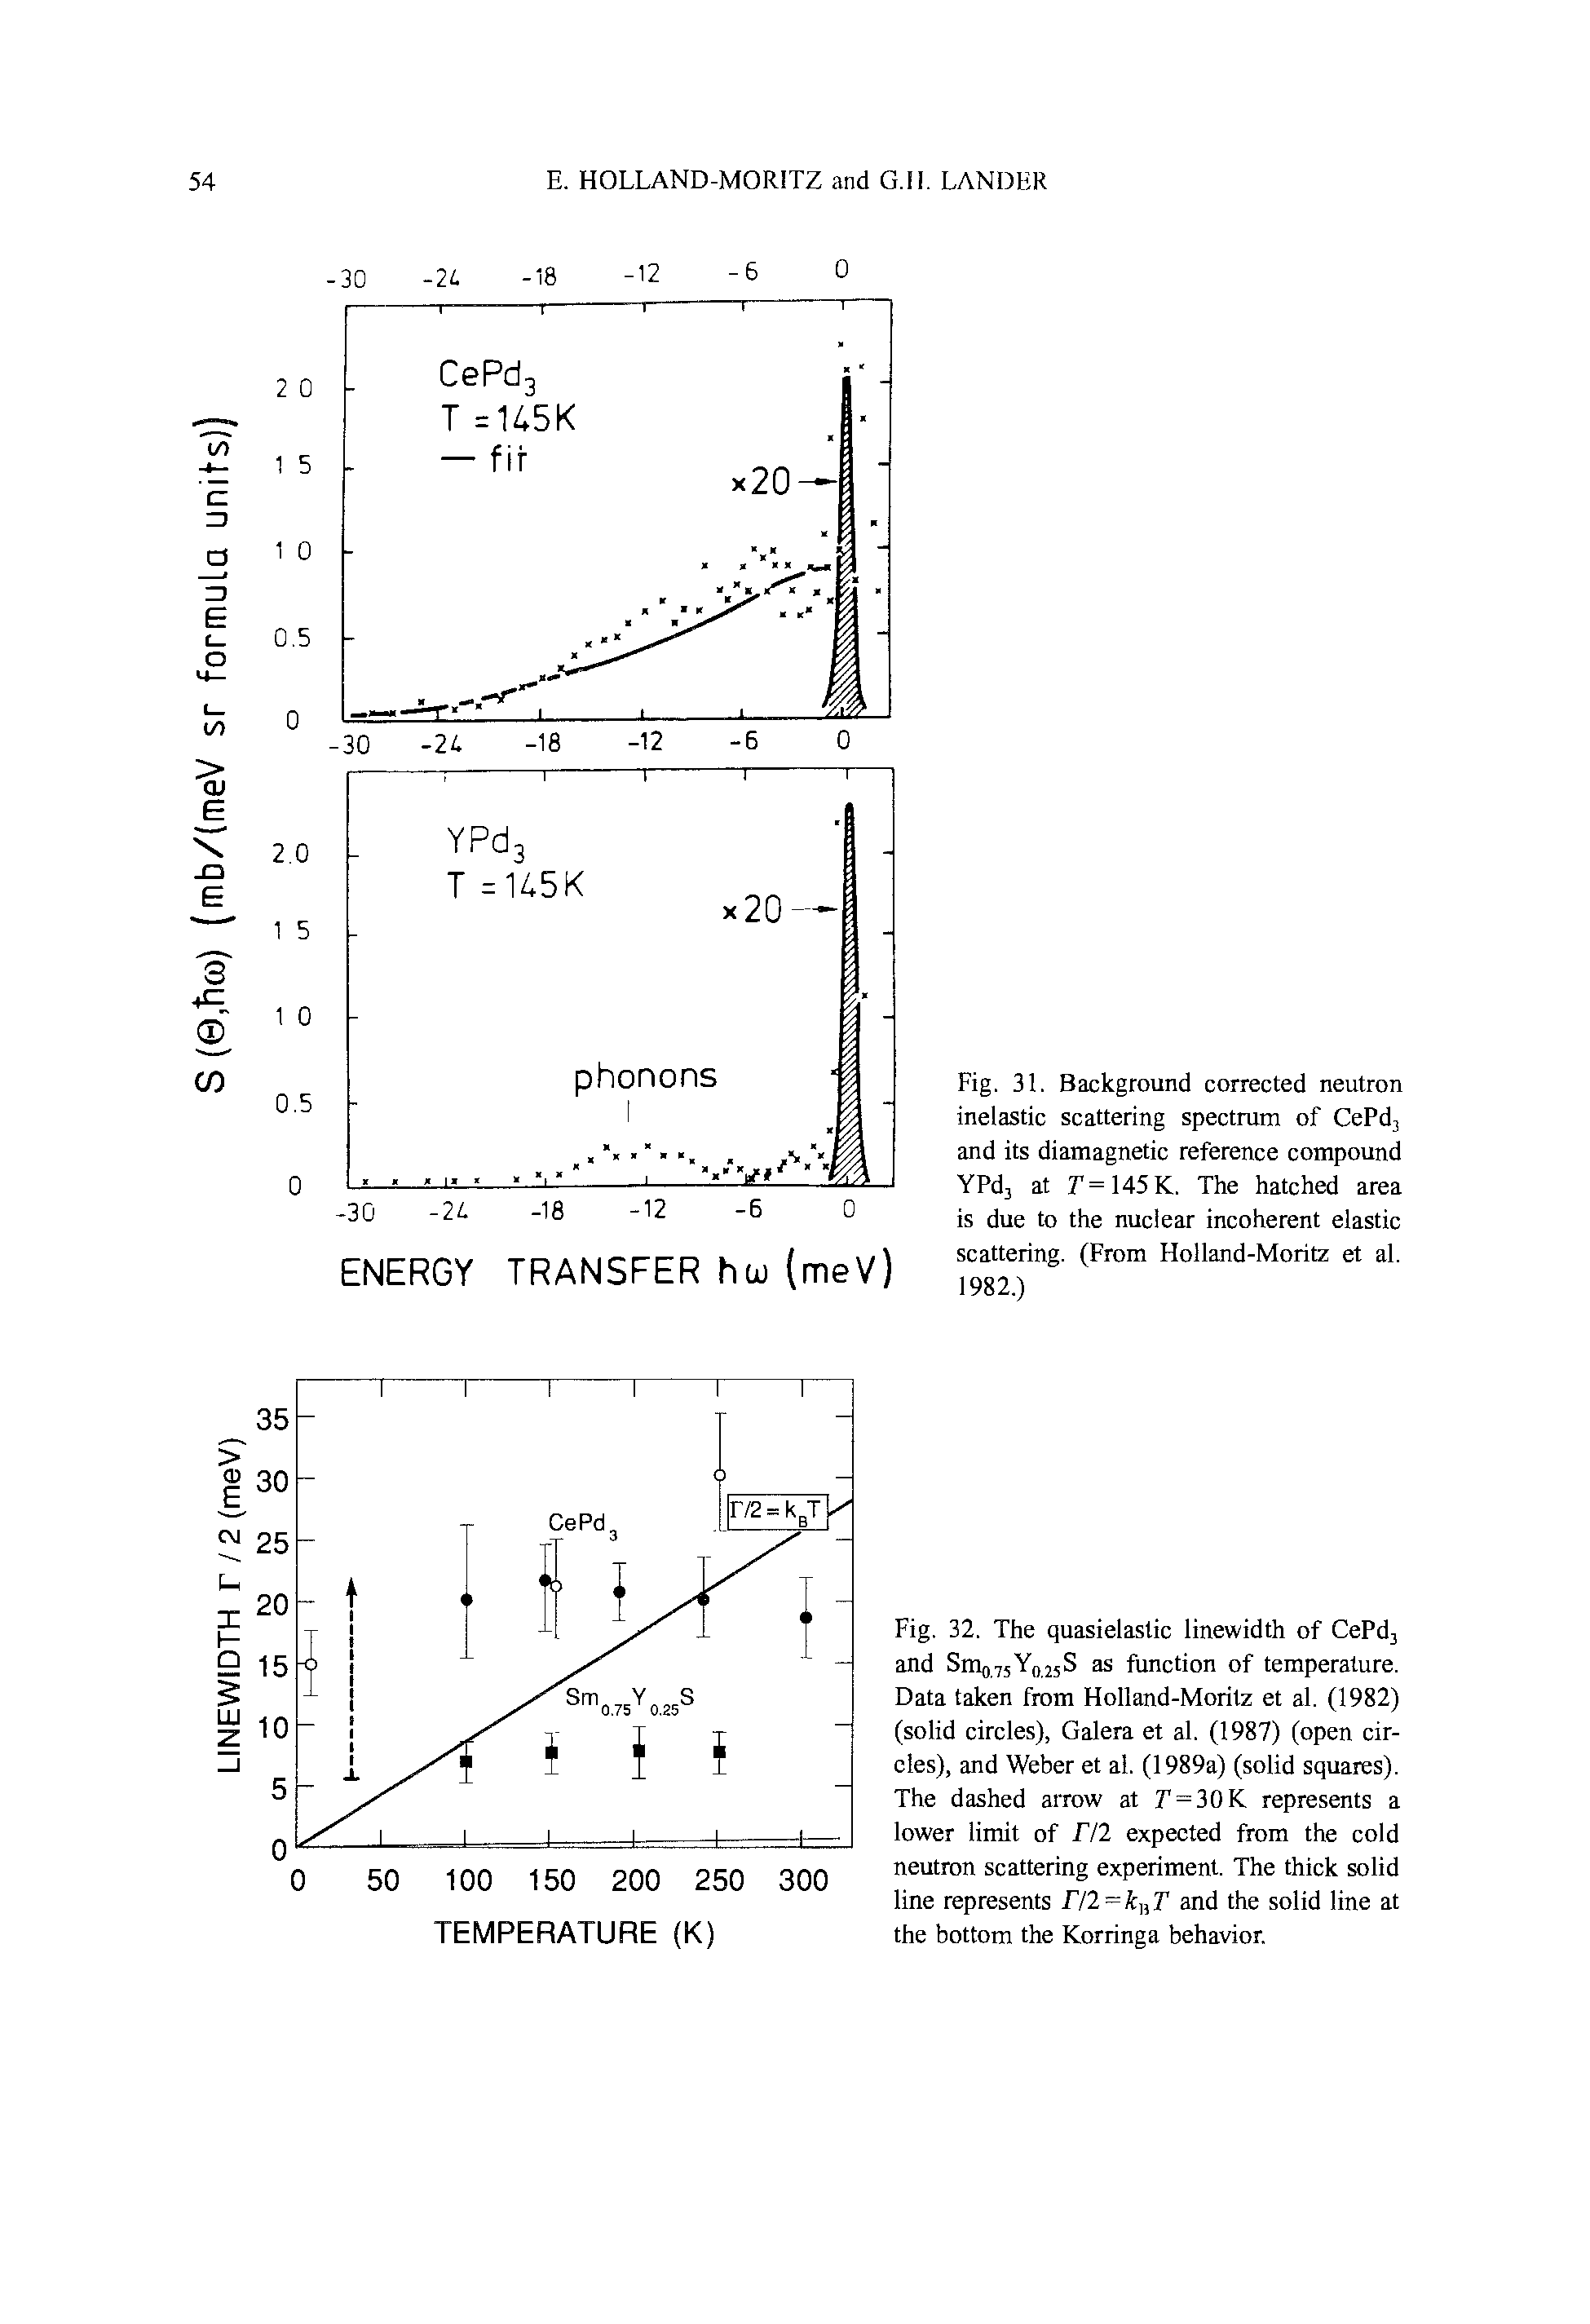 Fig. 31. Background corrected neutron inelastic scattering spectrum of CePdj and its diamagnetic reference compound YPdj at 7 =145K. The hatched area is due to the nuclear incoherent elastic scattering. (From Holland-Moritz et al. 1982.)...